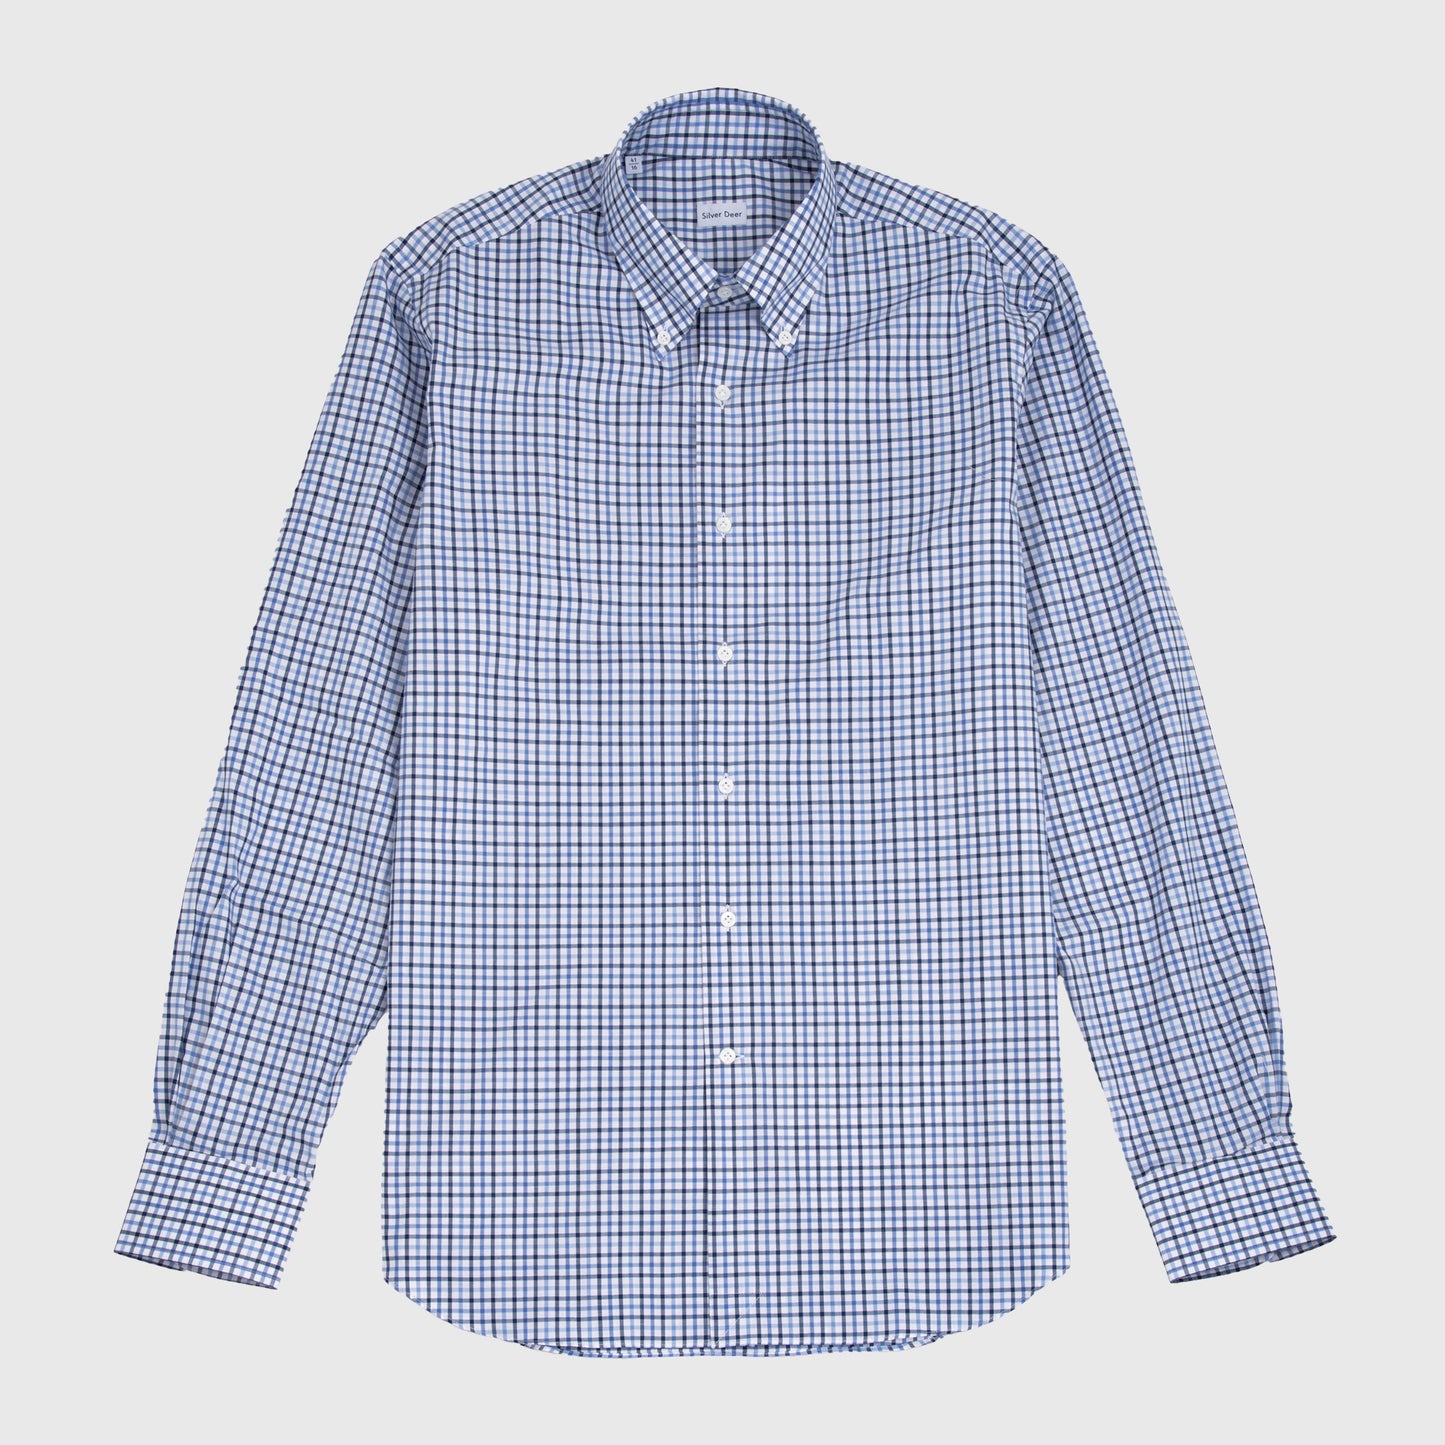 Cotton Pinpoint Checked Shirt White, Navy, Light Blue